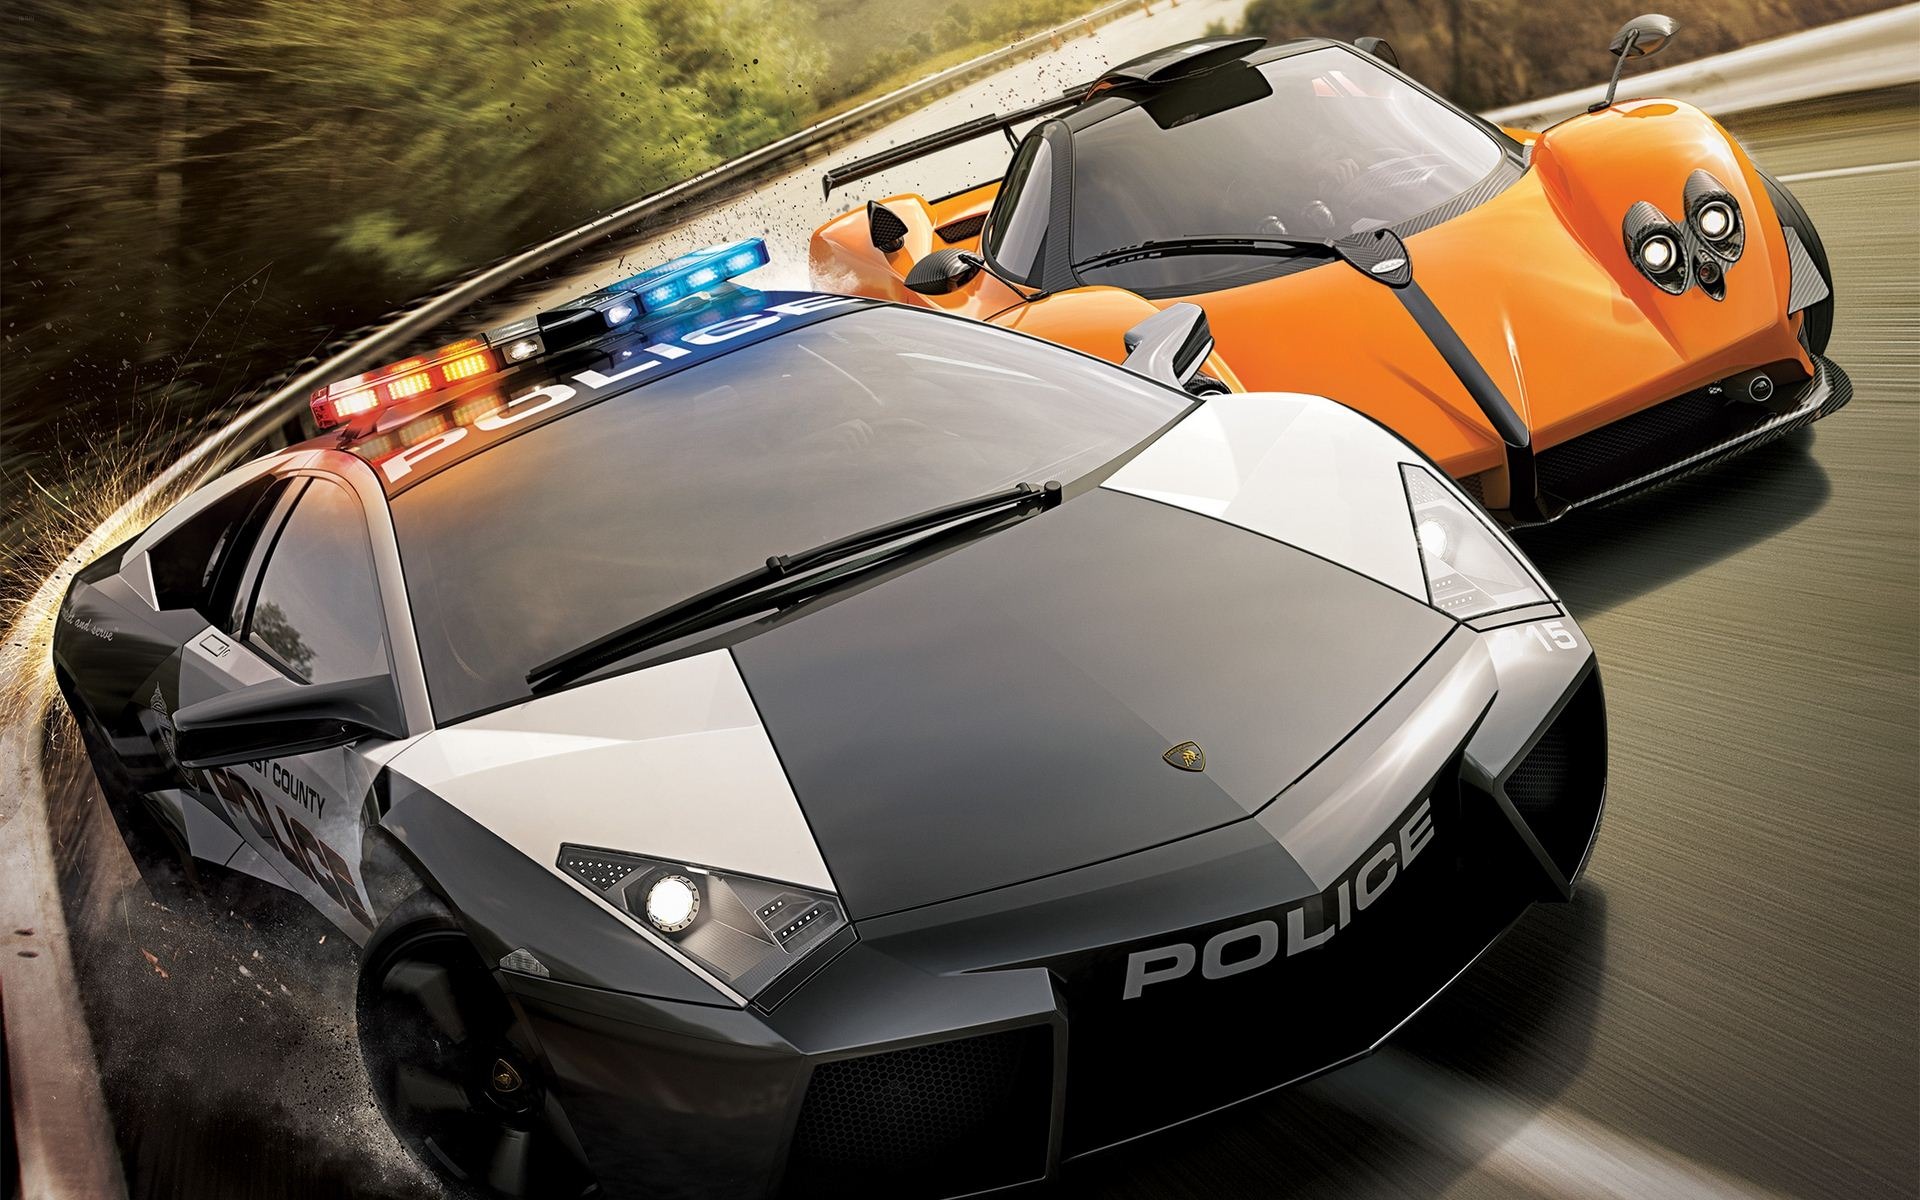 Need for Speed: Hot Pursuit 極品飛車14：熱力追踪 #3 - 1920x1200